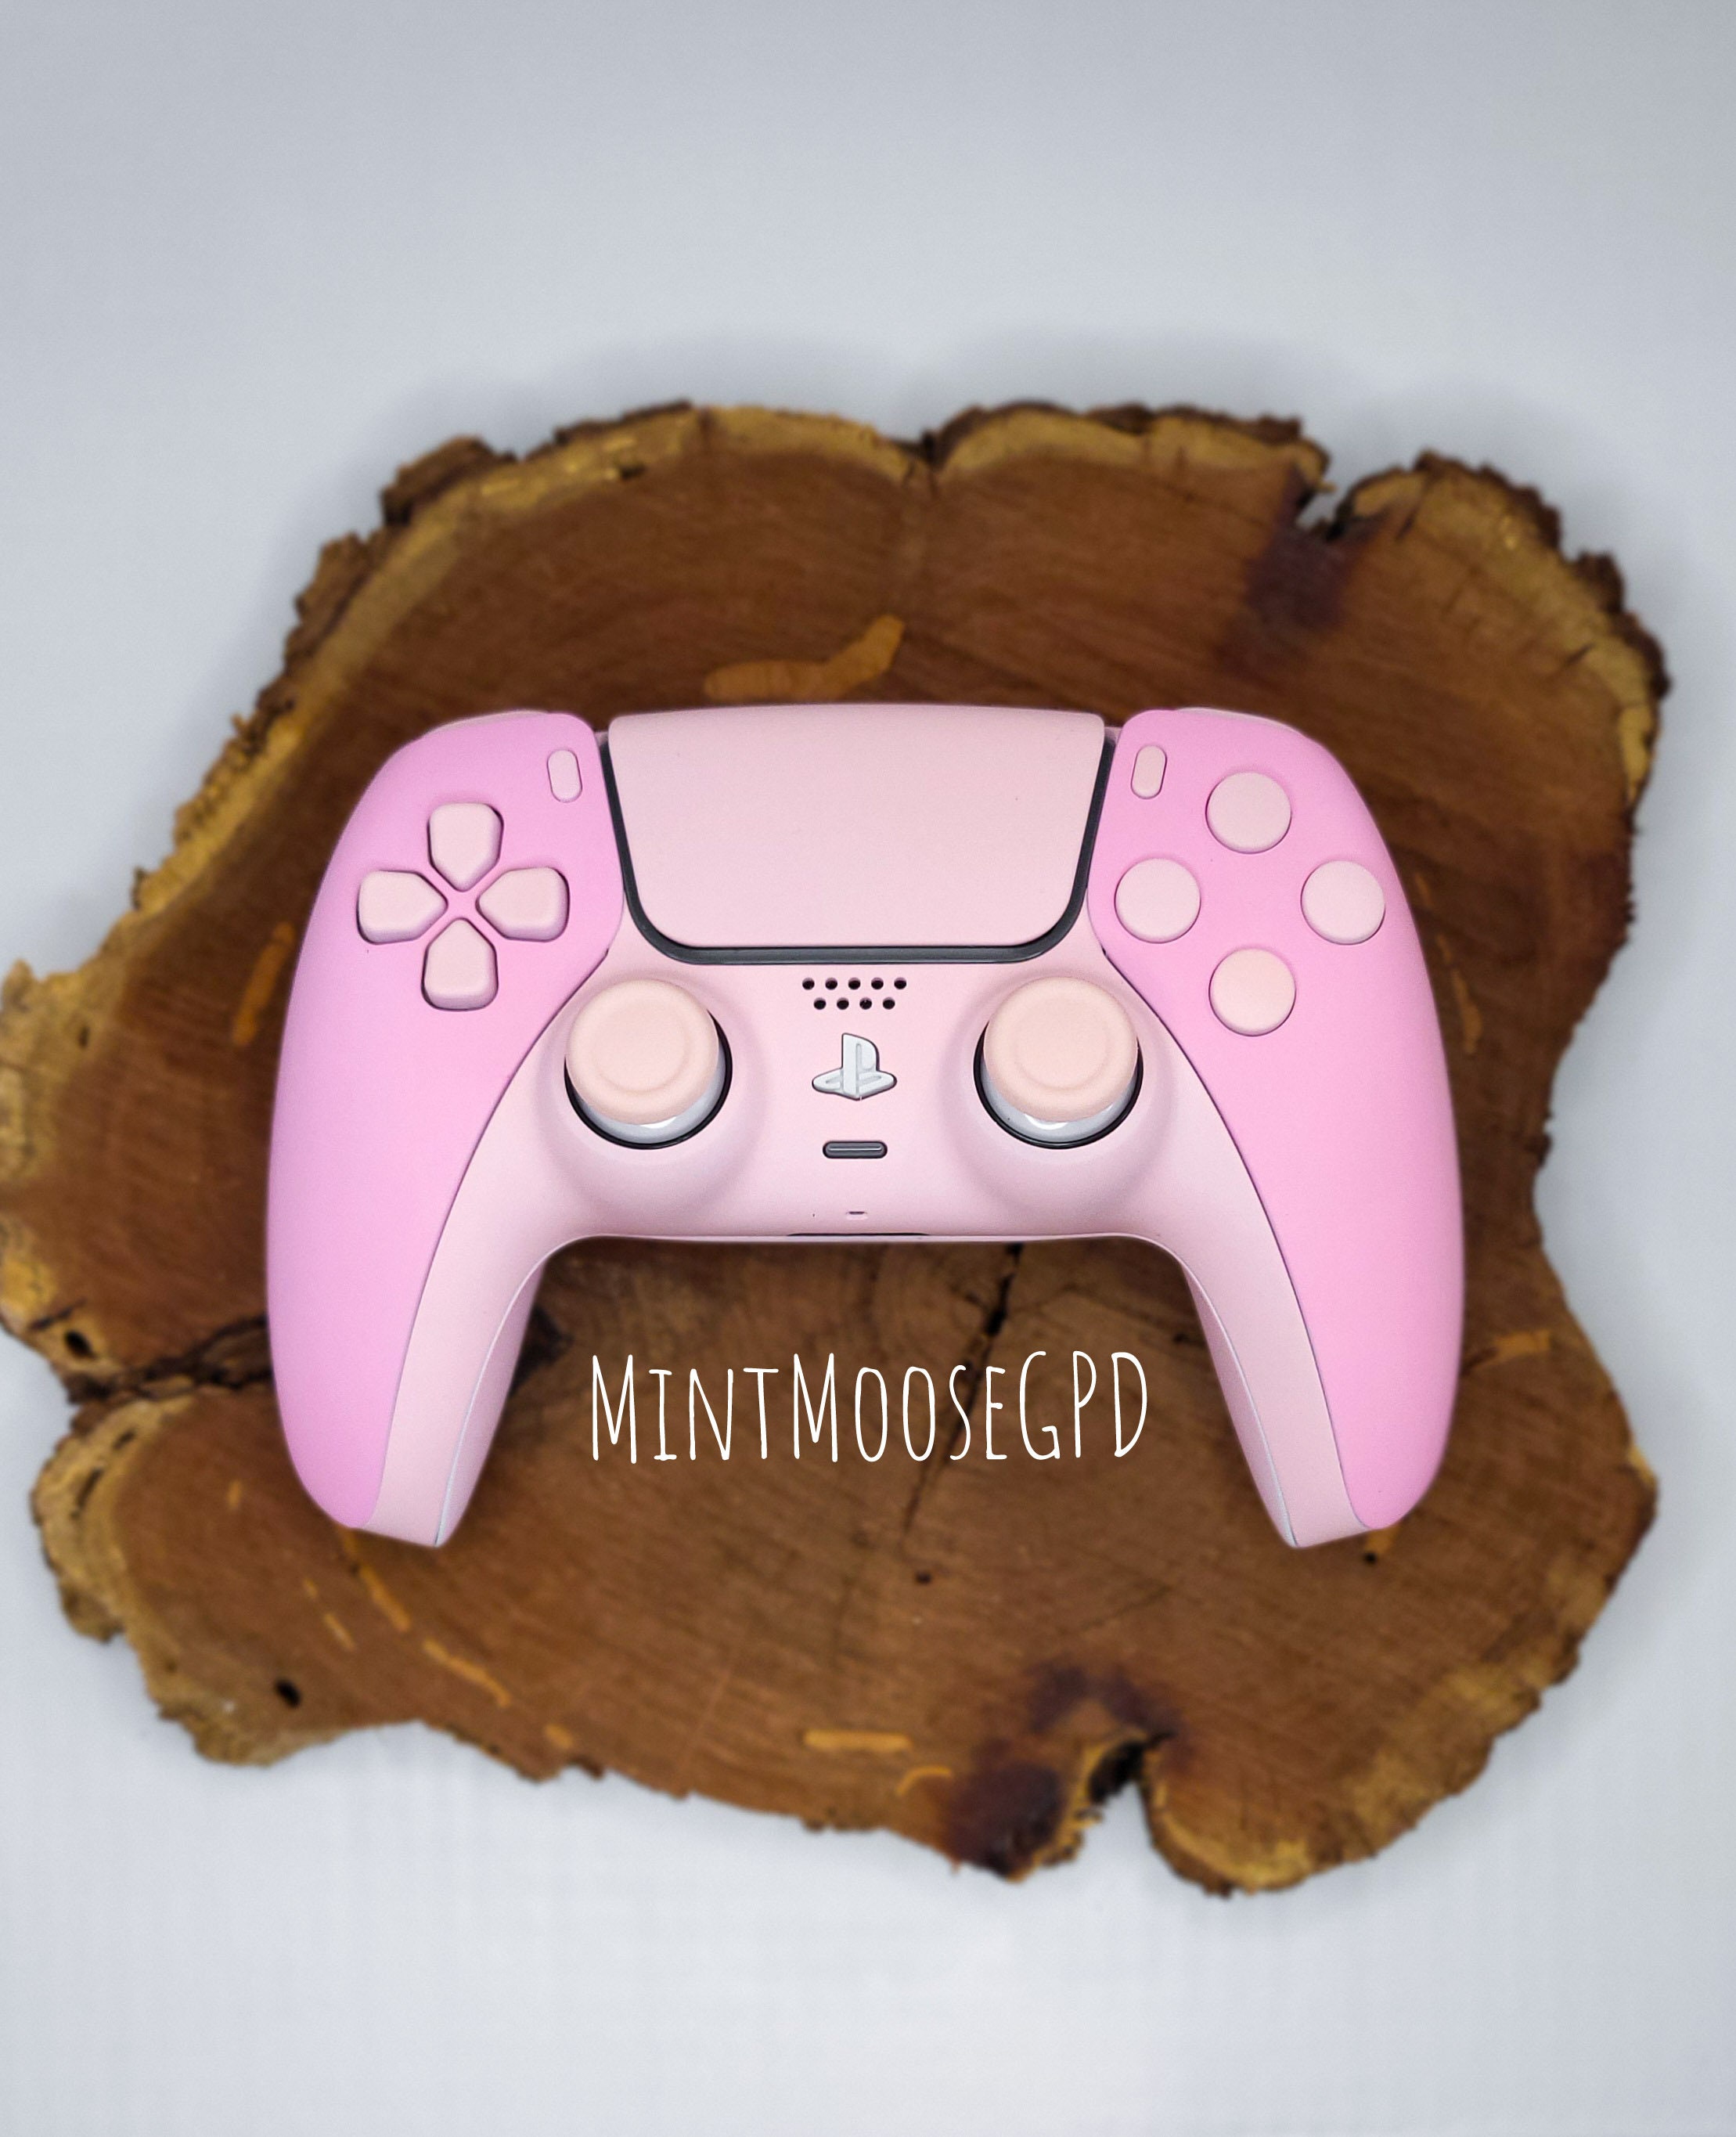 Pink Diamond Plate Skin For Sony PlayStation 5 Controller